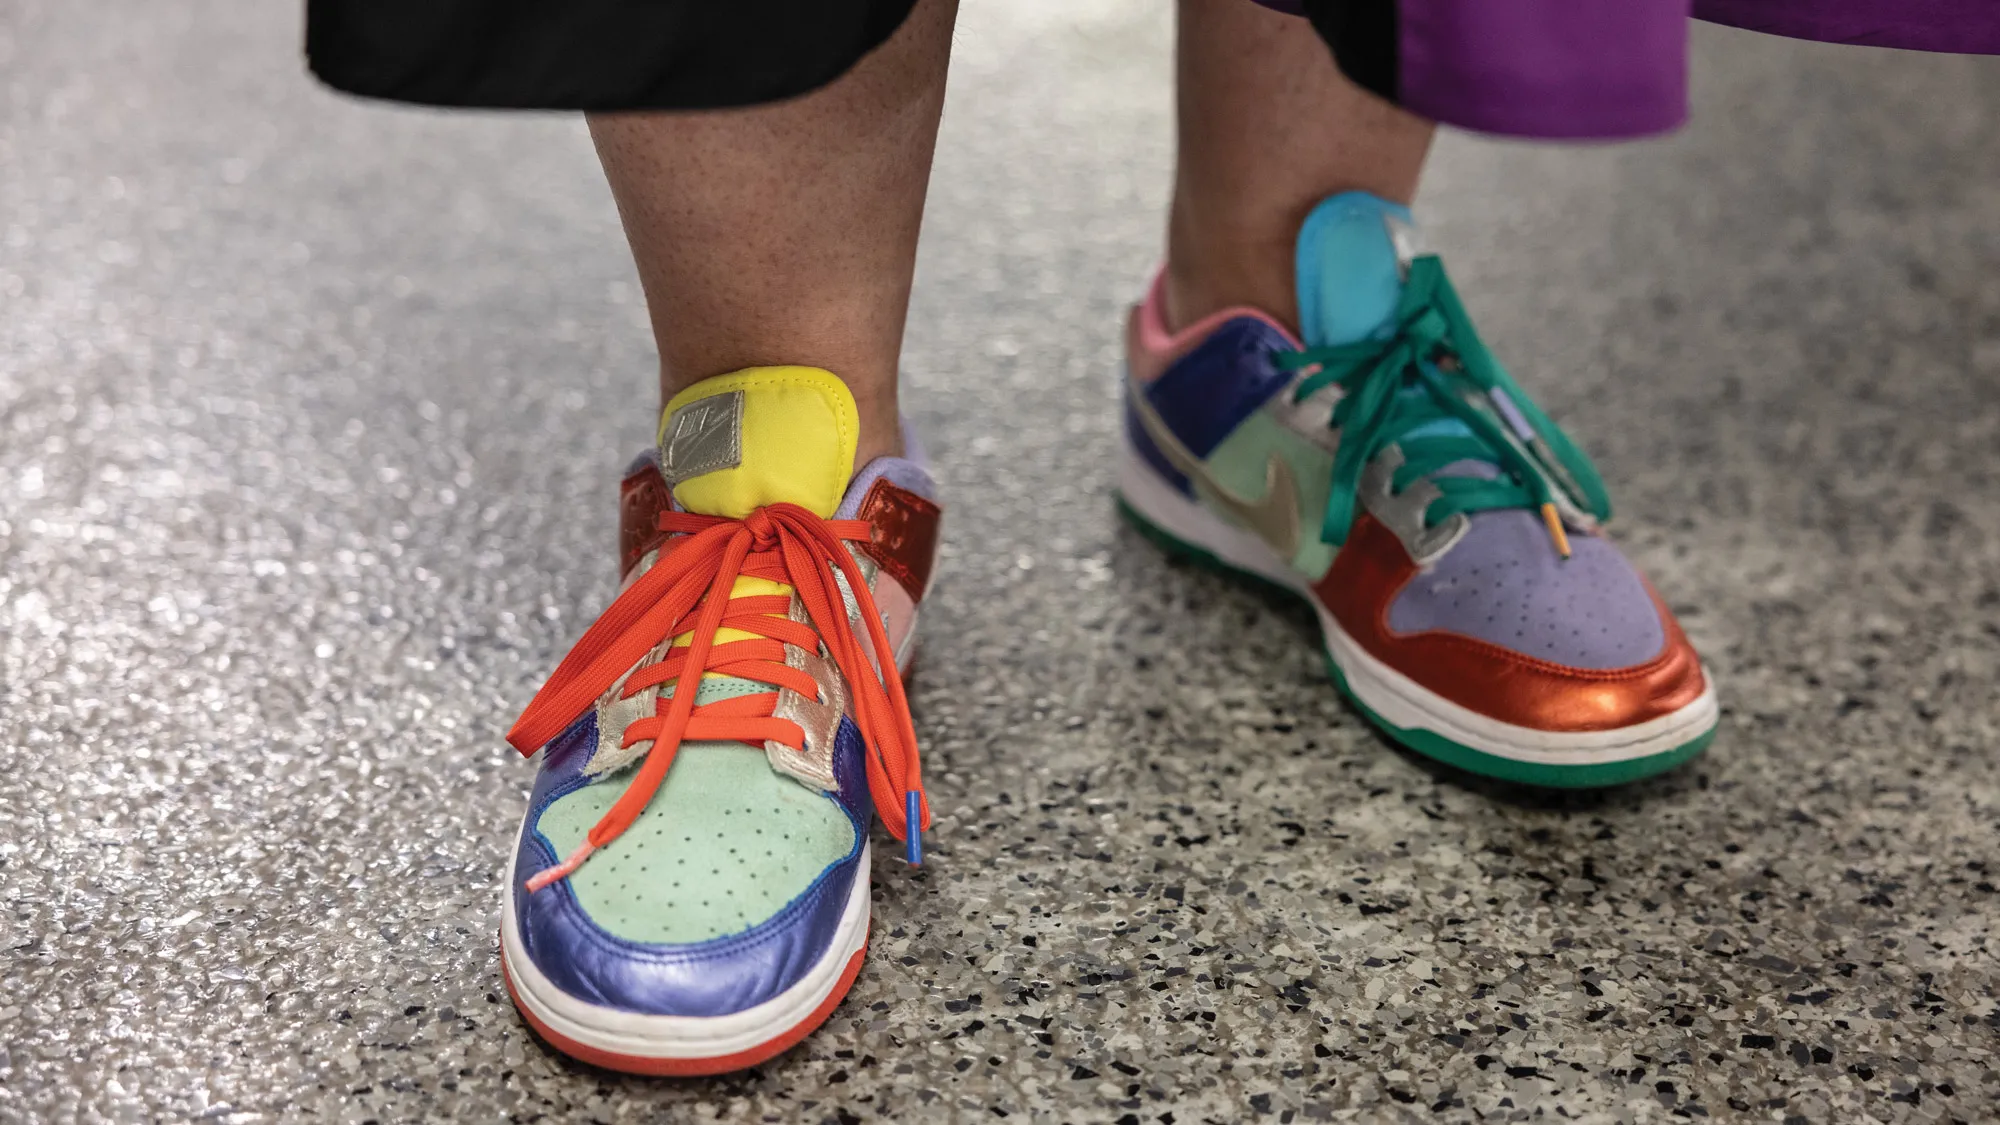 In a photo showing only Betsy’s feet, she wears a multicolored pair of unusual gym shoes, in that each shoe has color blocks in different positions. On one, the edge of the toe is shiny orange, the laces are teal and the rest of the front, purple. On the other, the edge of the toe is shiny blue, the laces are orange and the rest of the toe is teal.